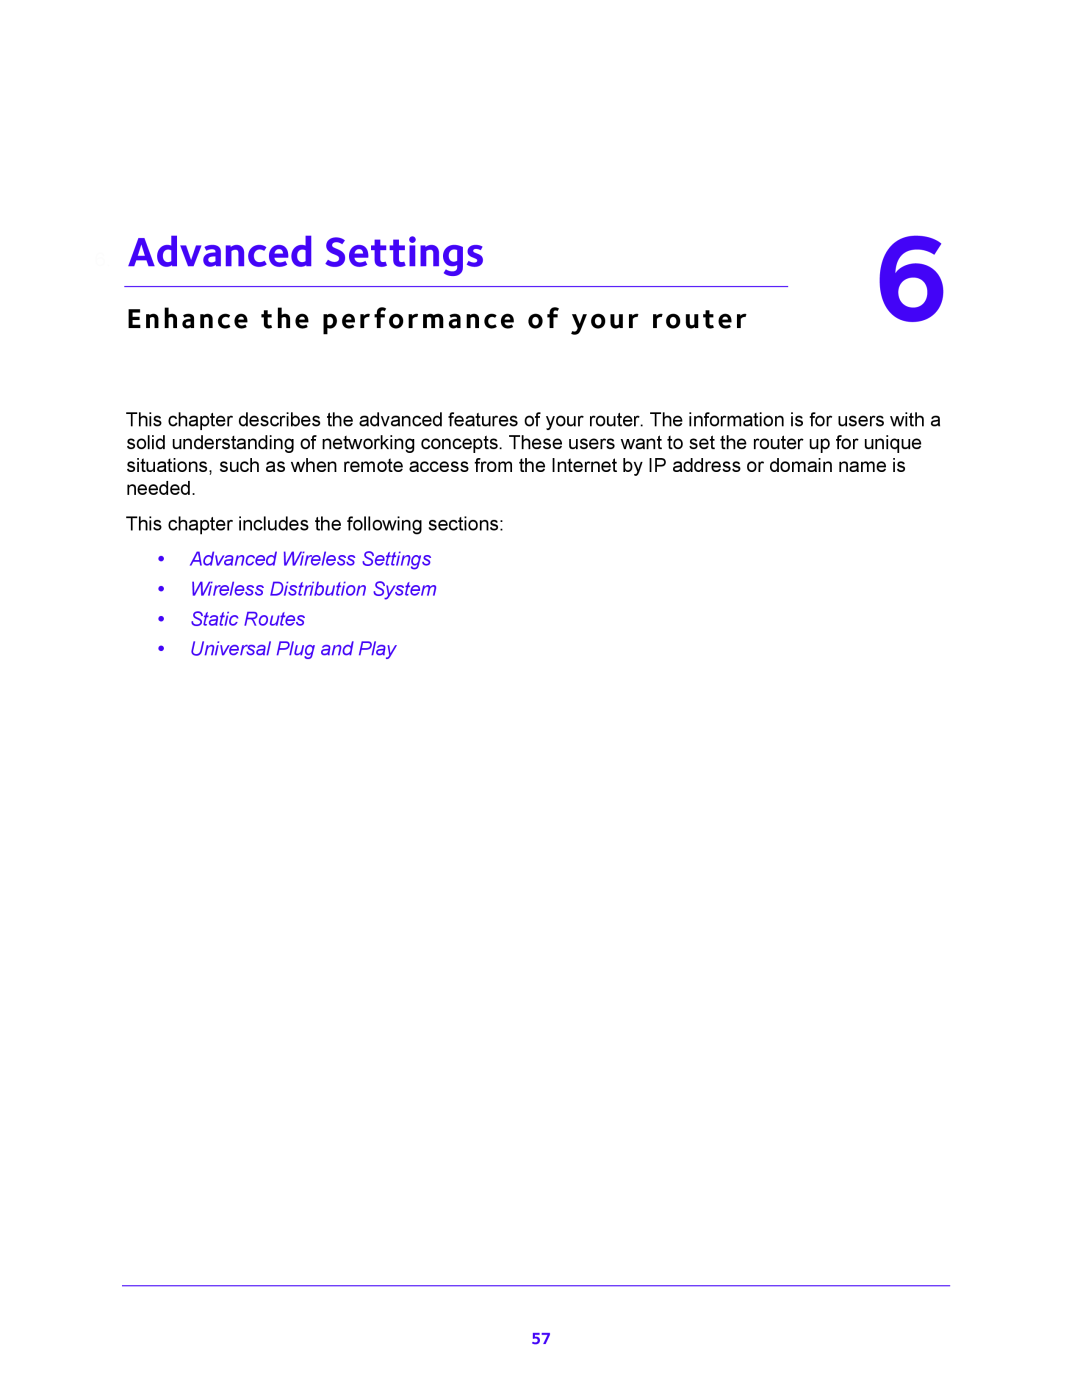 NETGEAR JNR1010V2 user manual Advanced Settings, Enhance the performance of your router, Universal Plug and Play 